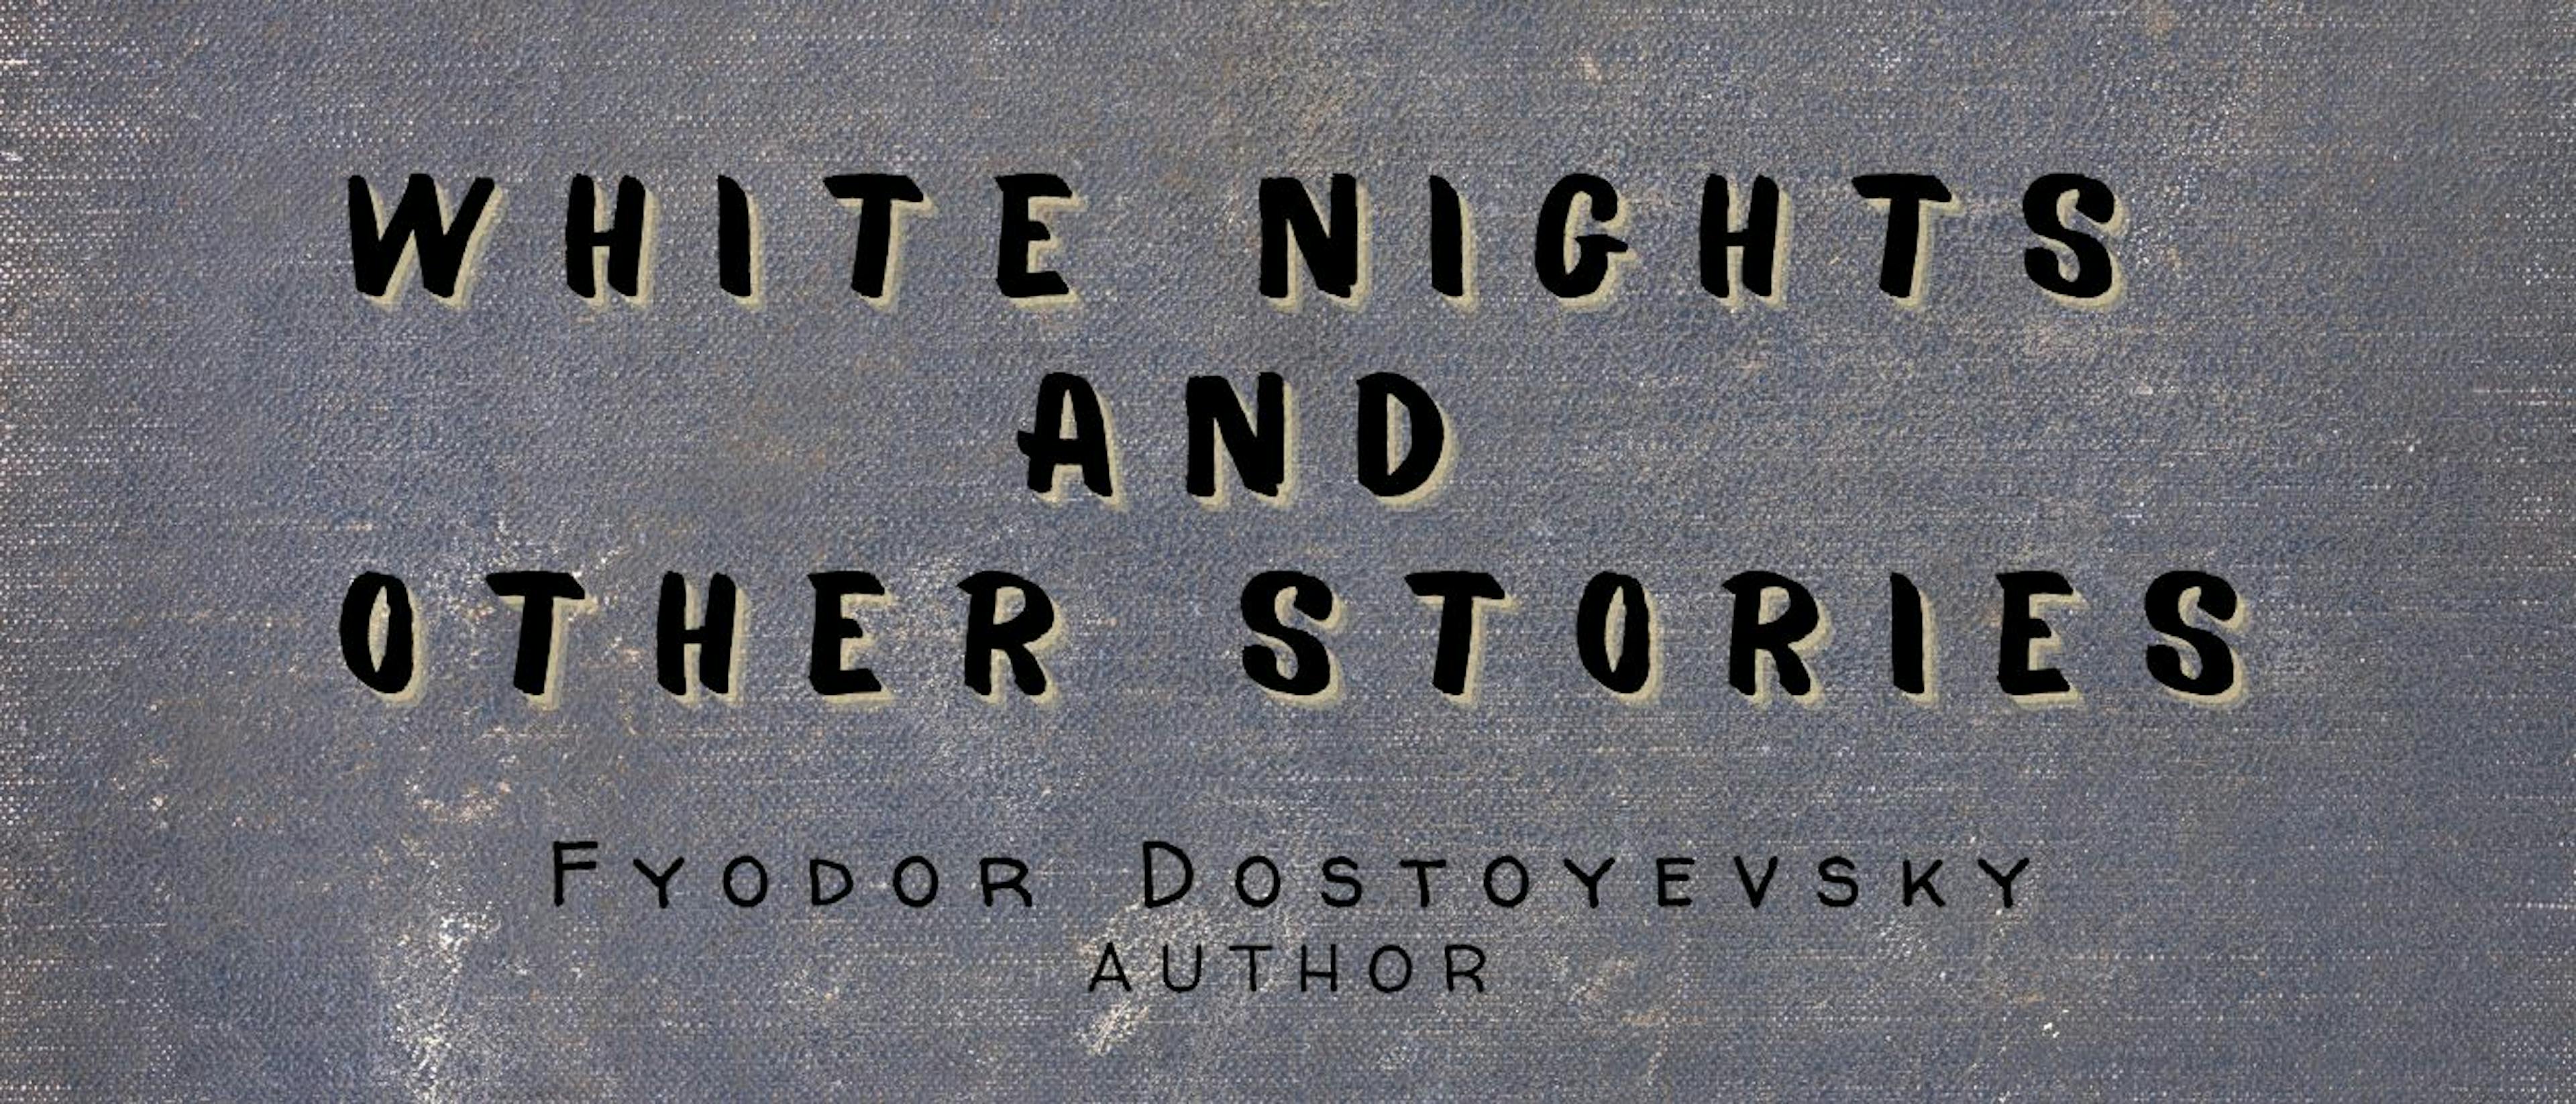 featured image - White Nights and Other Stories by Fyodor Dostoyevsky - Table of Links